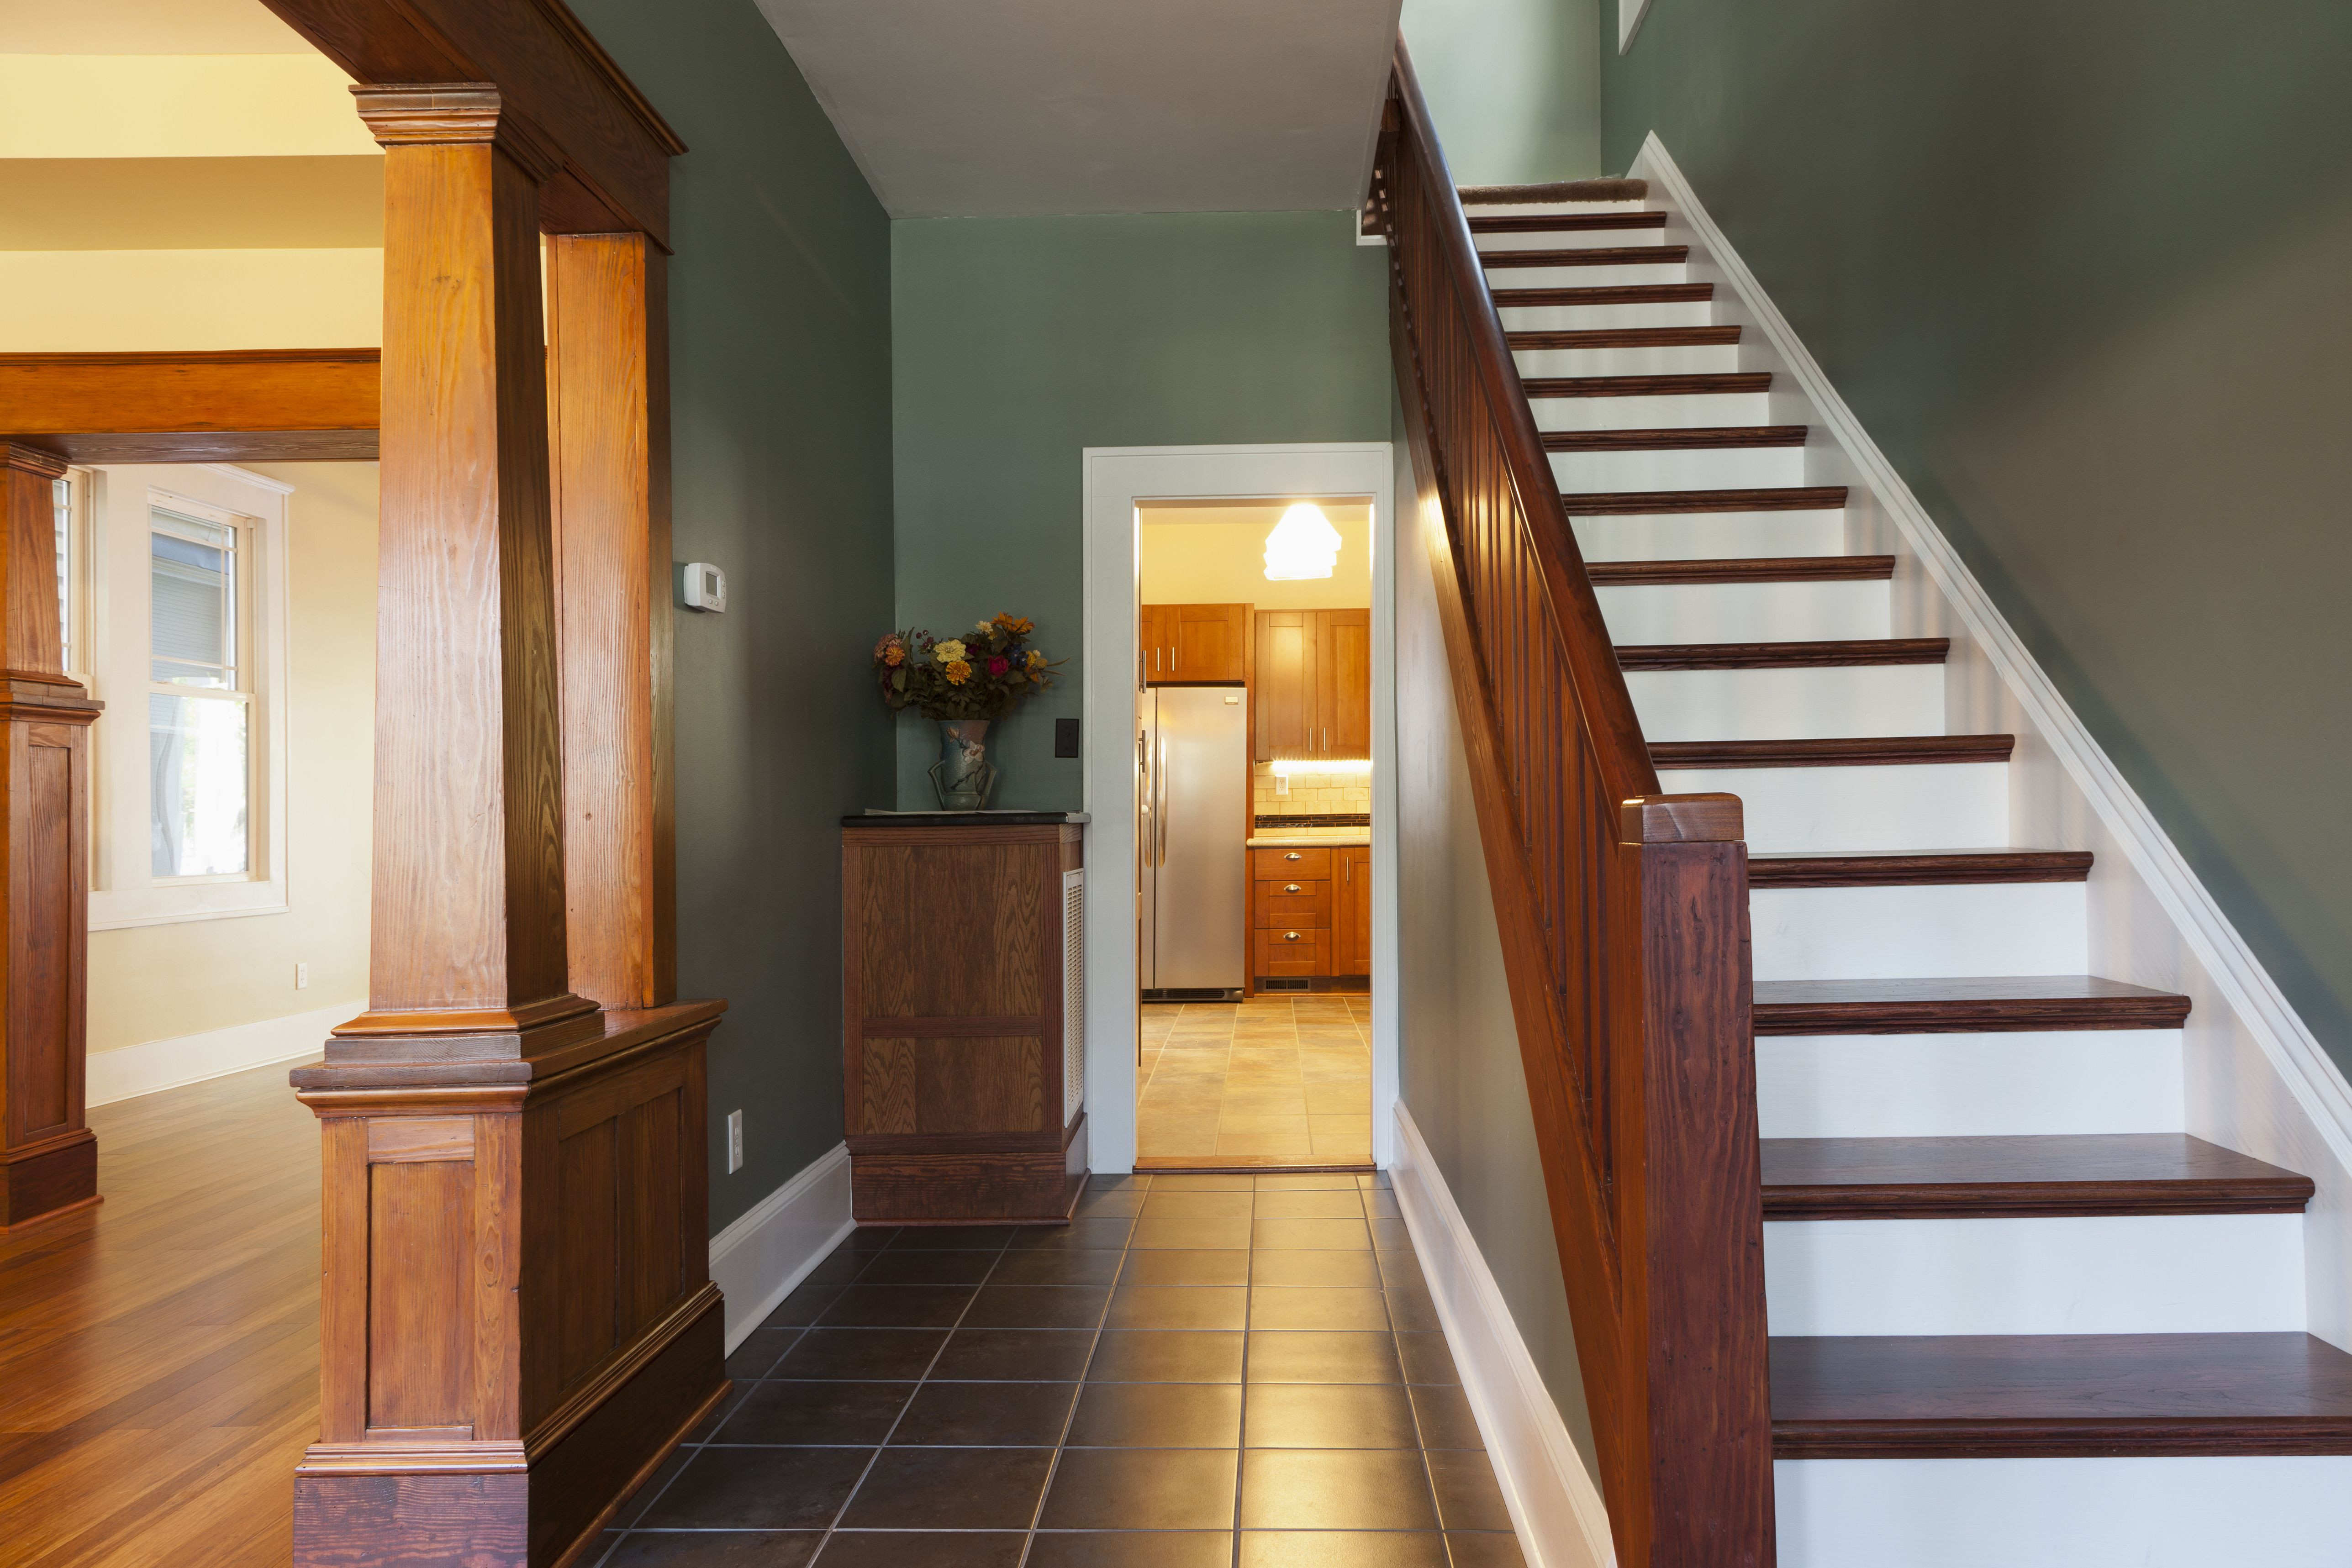 14 Best Hardwood Floor Transition Ideas 2024 free download hardwood floor transition ideas of guide to basic floor transition strips in stairs and corridor in new house 463247115 5a845ccffa6bcc0036b7c720